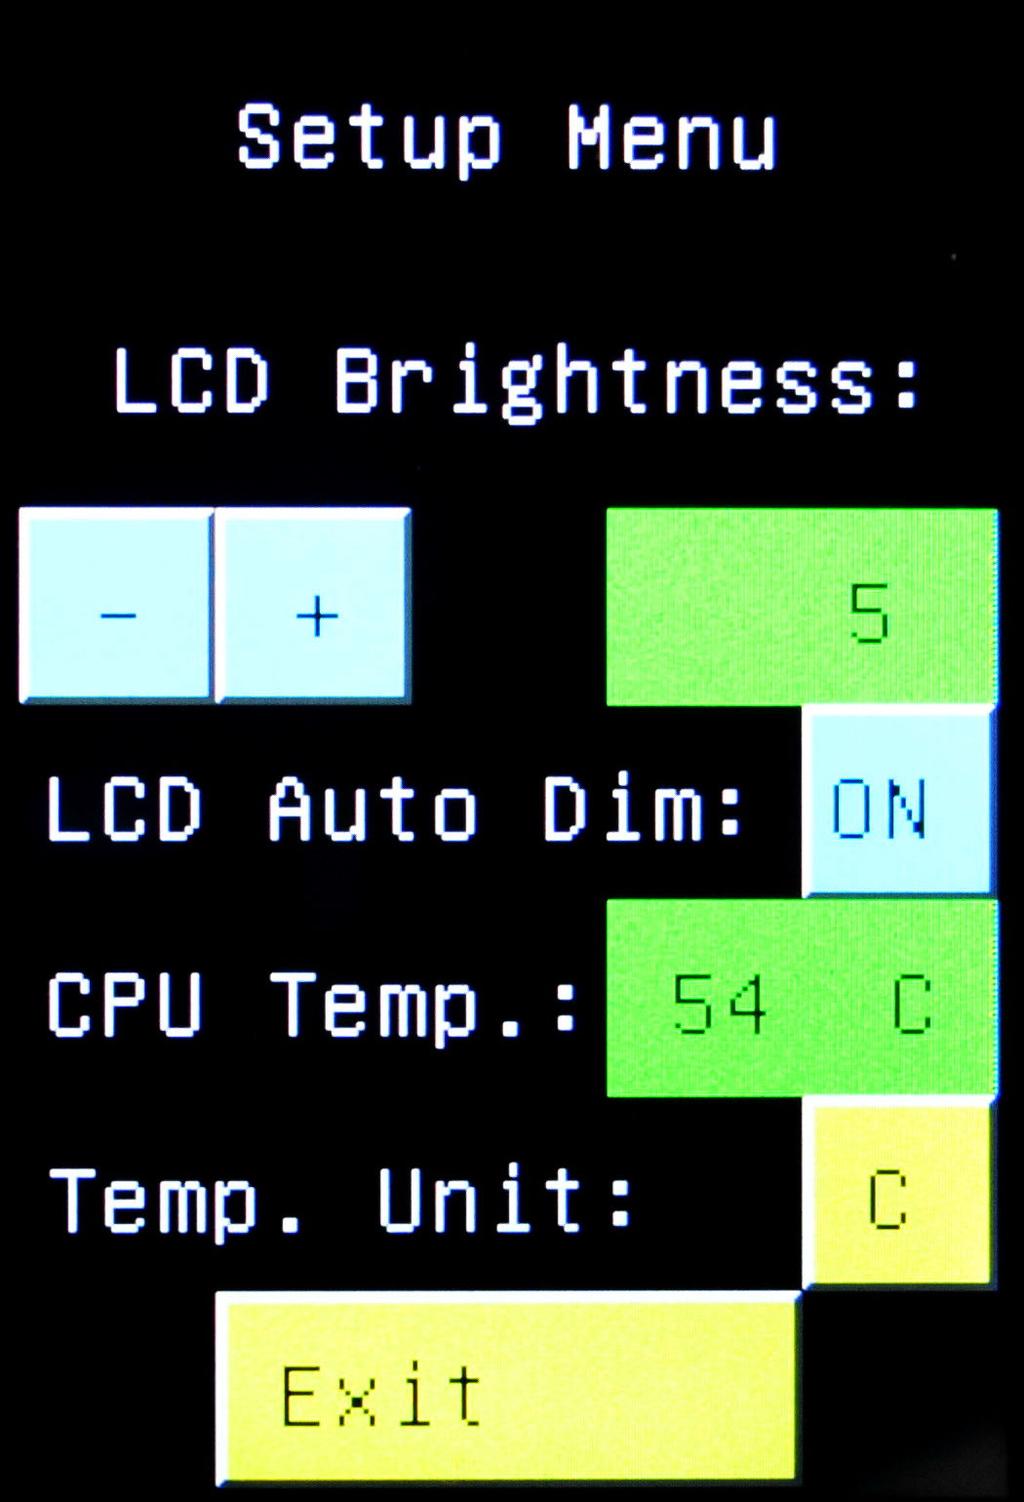 Setup Screen +: Increases the brightness of the LCD display. Range is from 1 to 9. -: Decreases the brightness of the LCD display. Range is from 1 to 9. Auto Dim: Touch the ON/OFF field to enable/disable the LCD Auto Dim function.